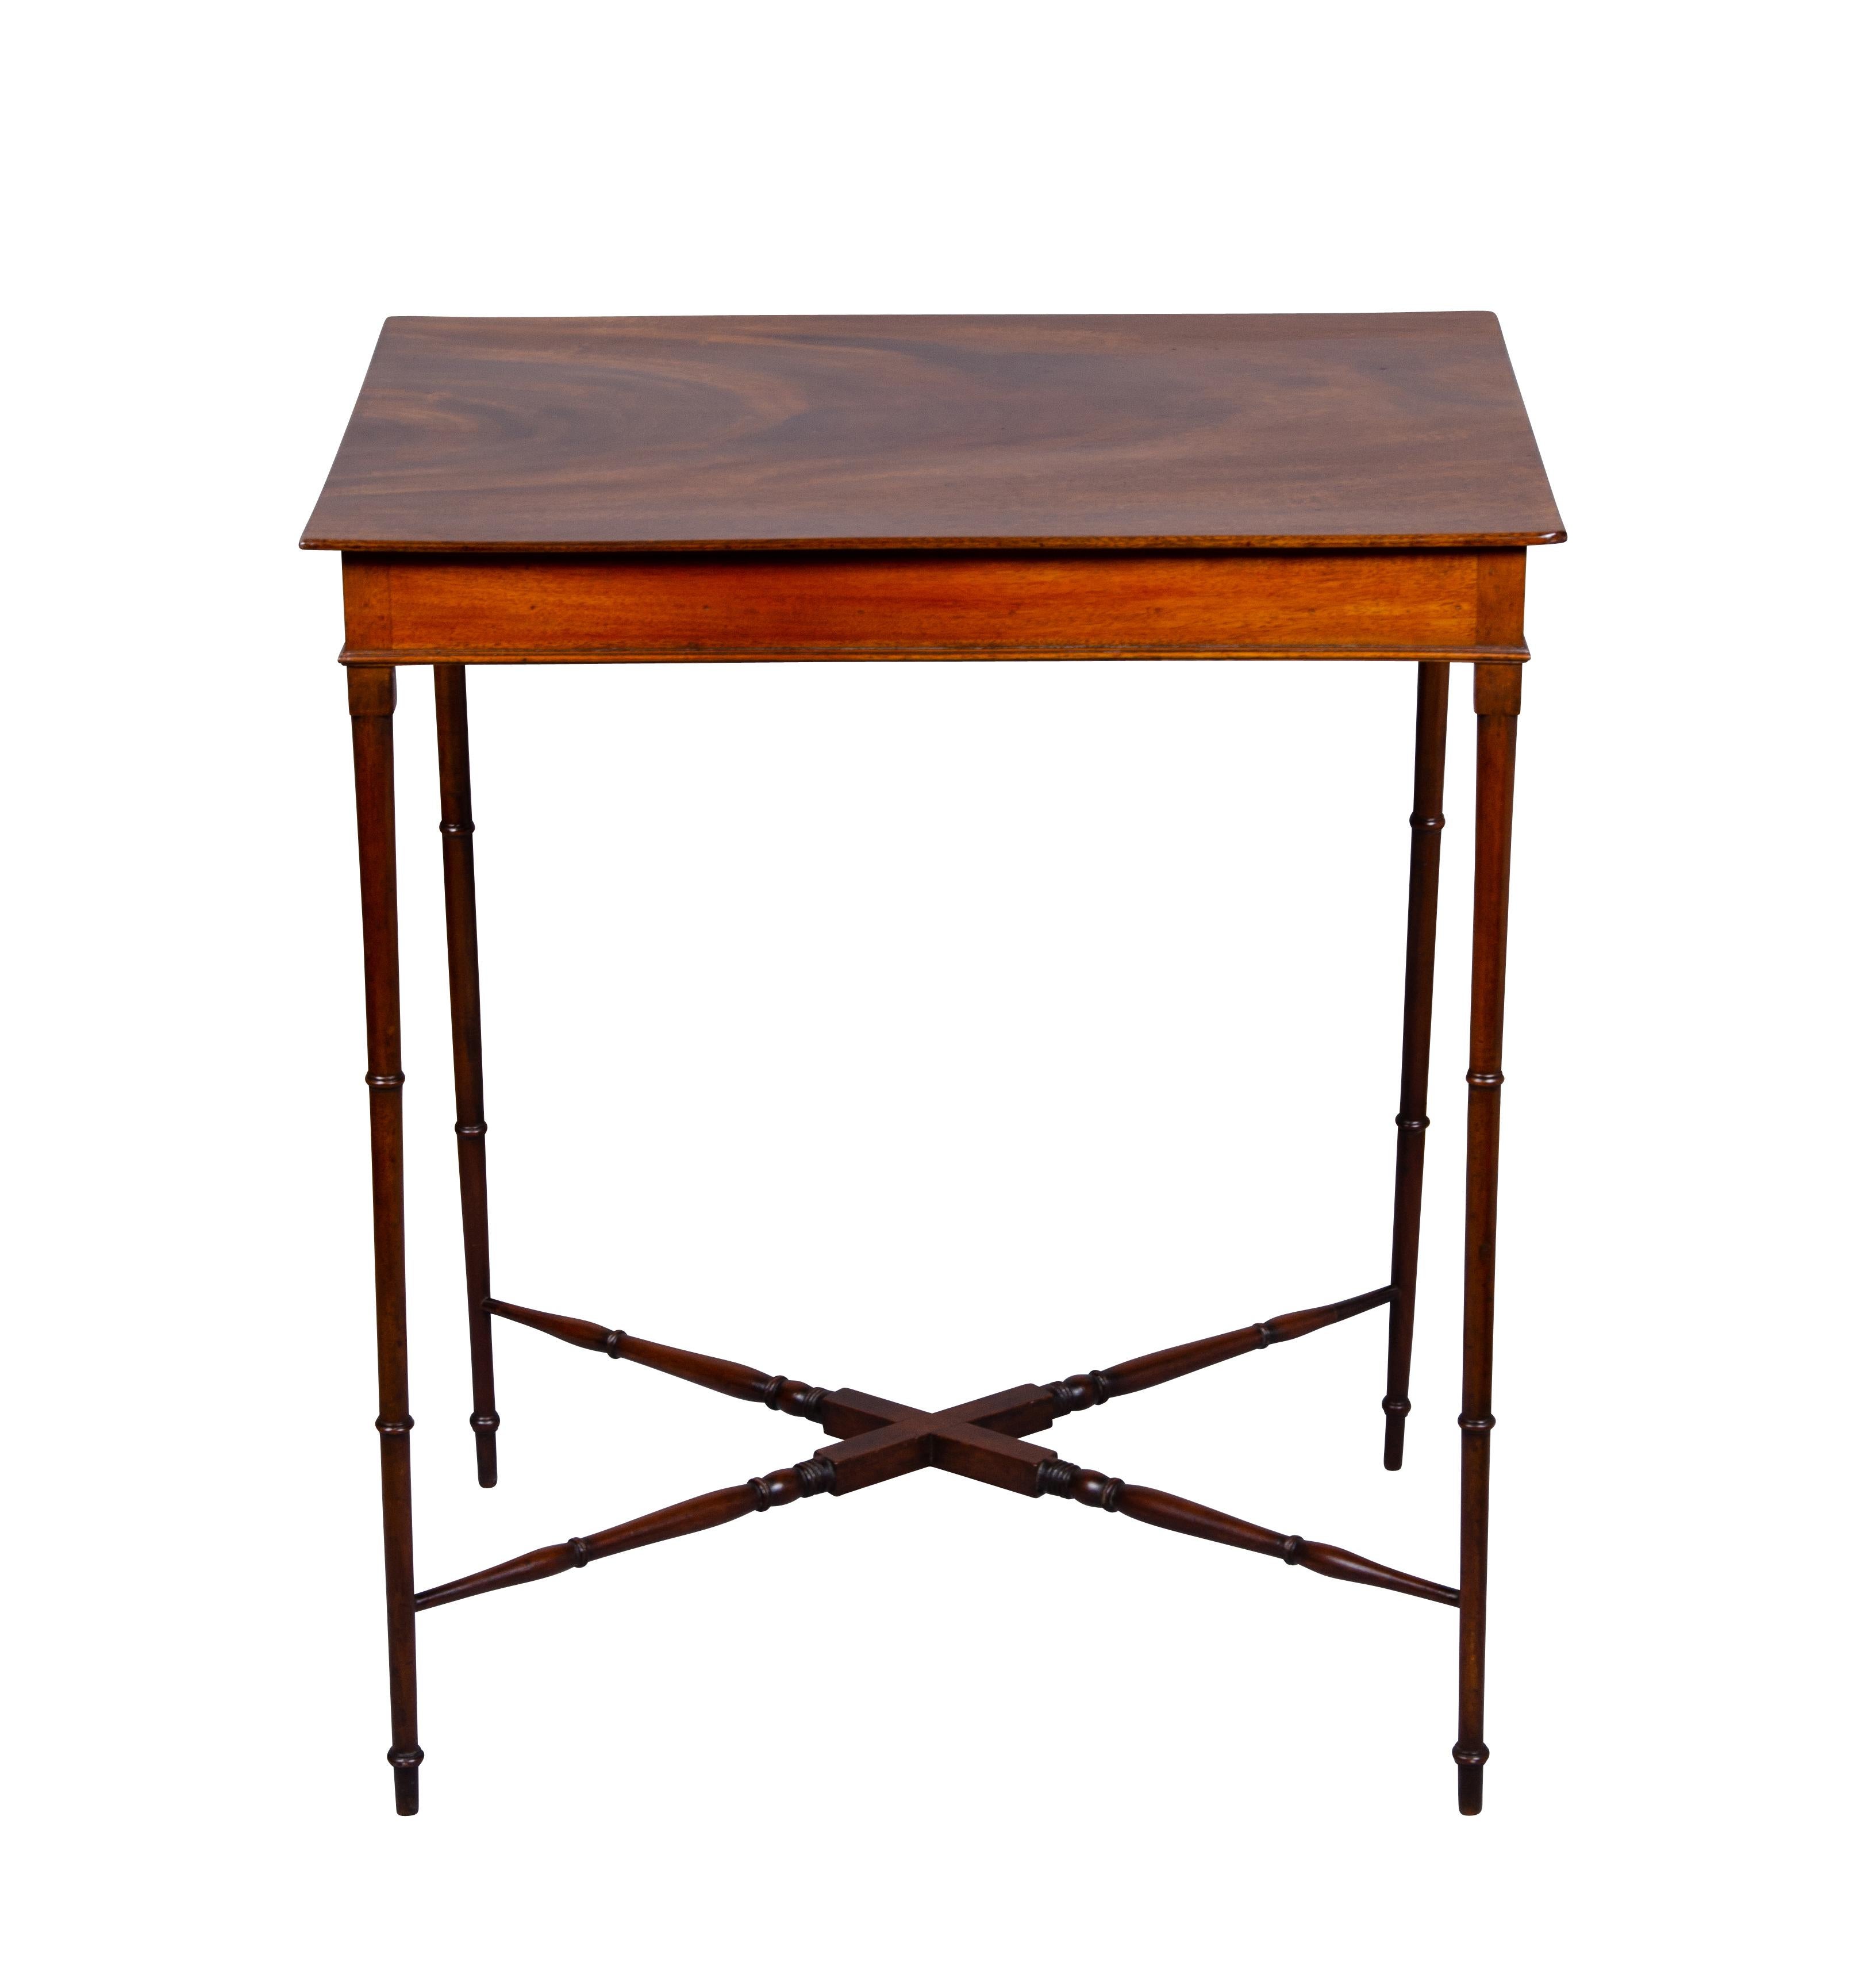 A cute delicate but sturdy table all nicely French polished.
Rectangular top with bamboo turned legs and turned X form stretchers.